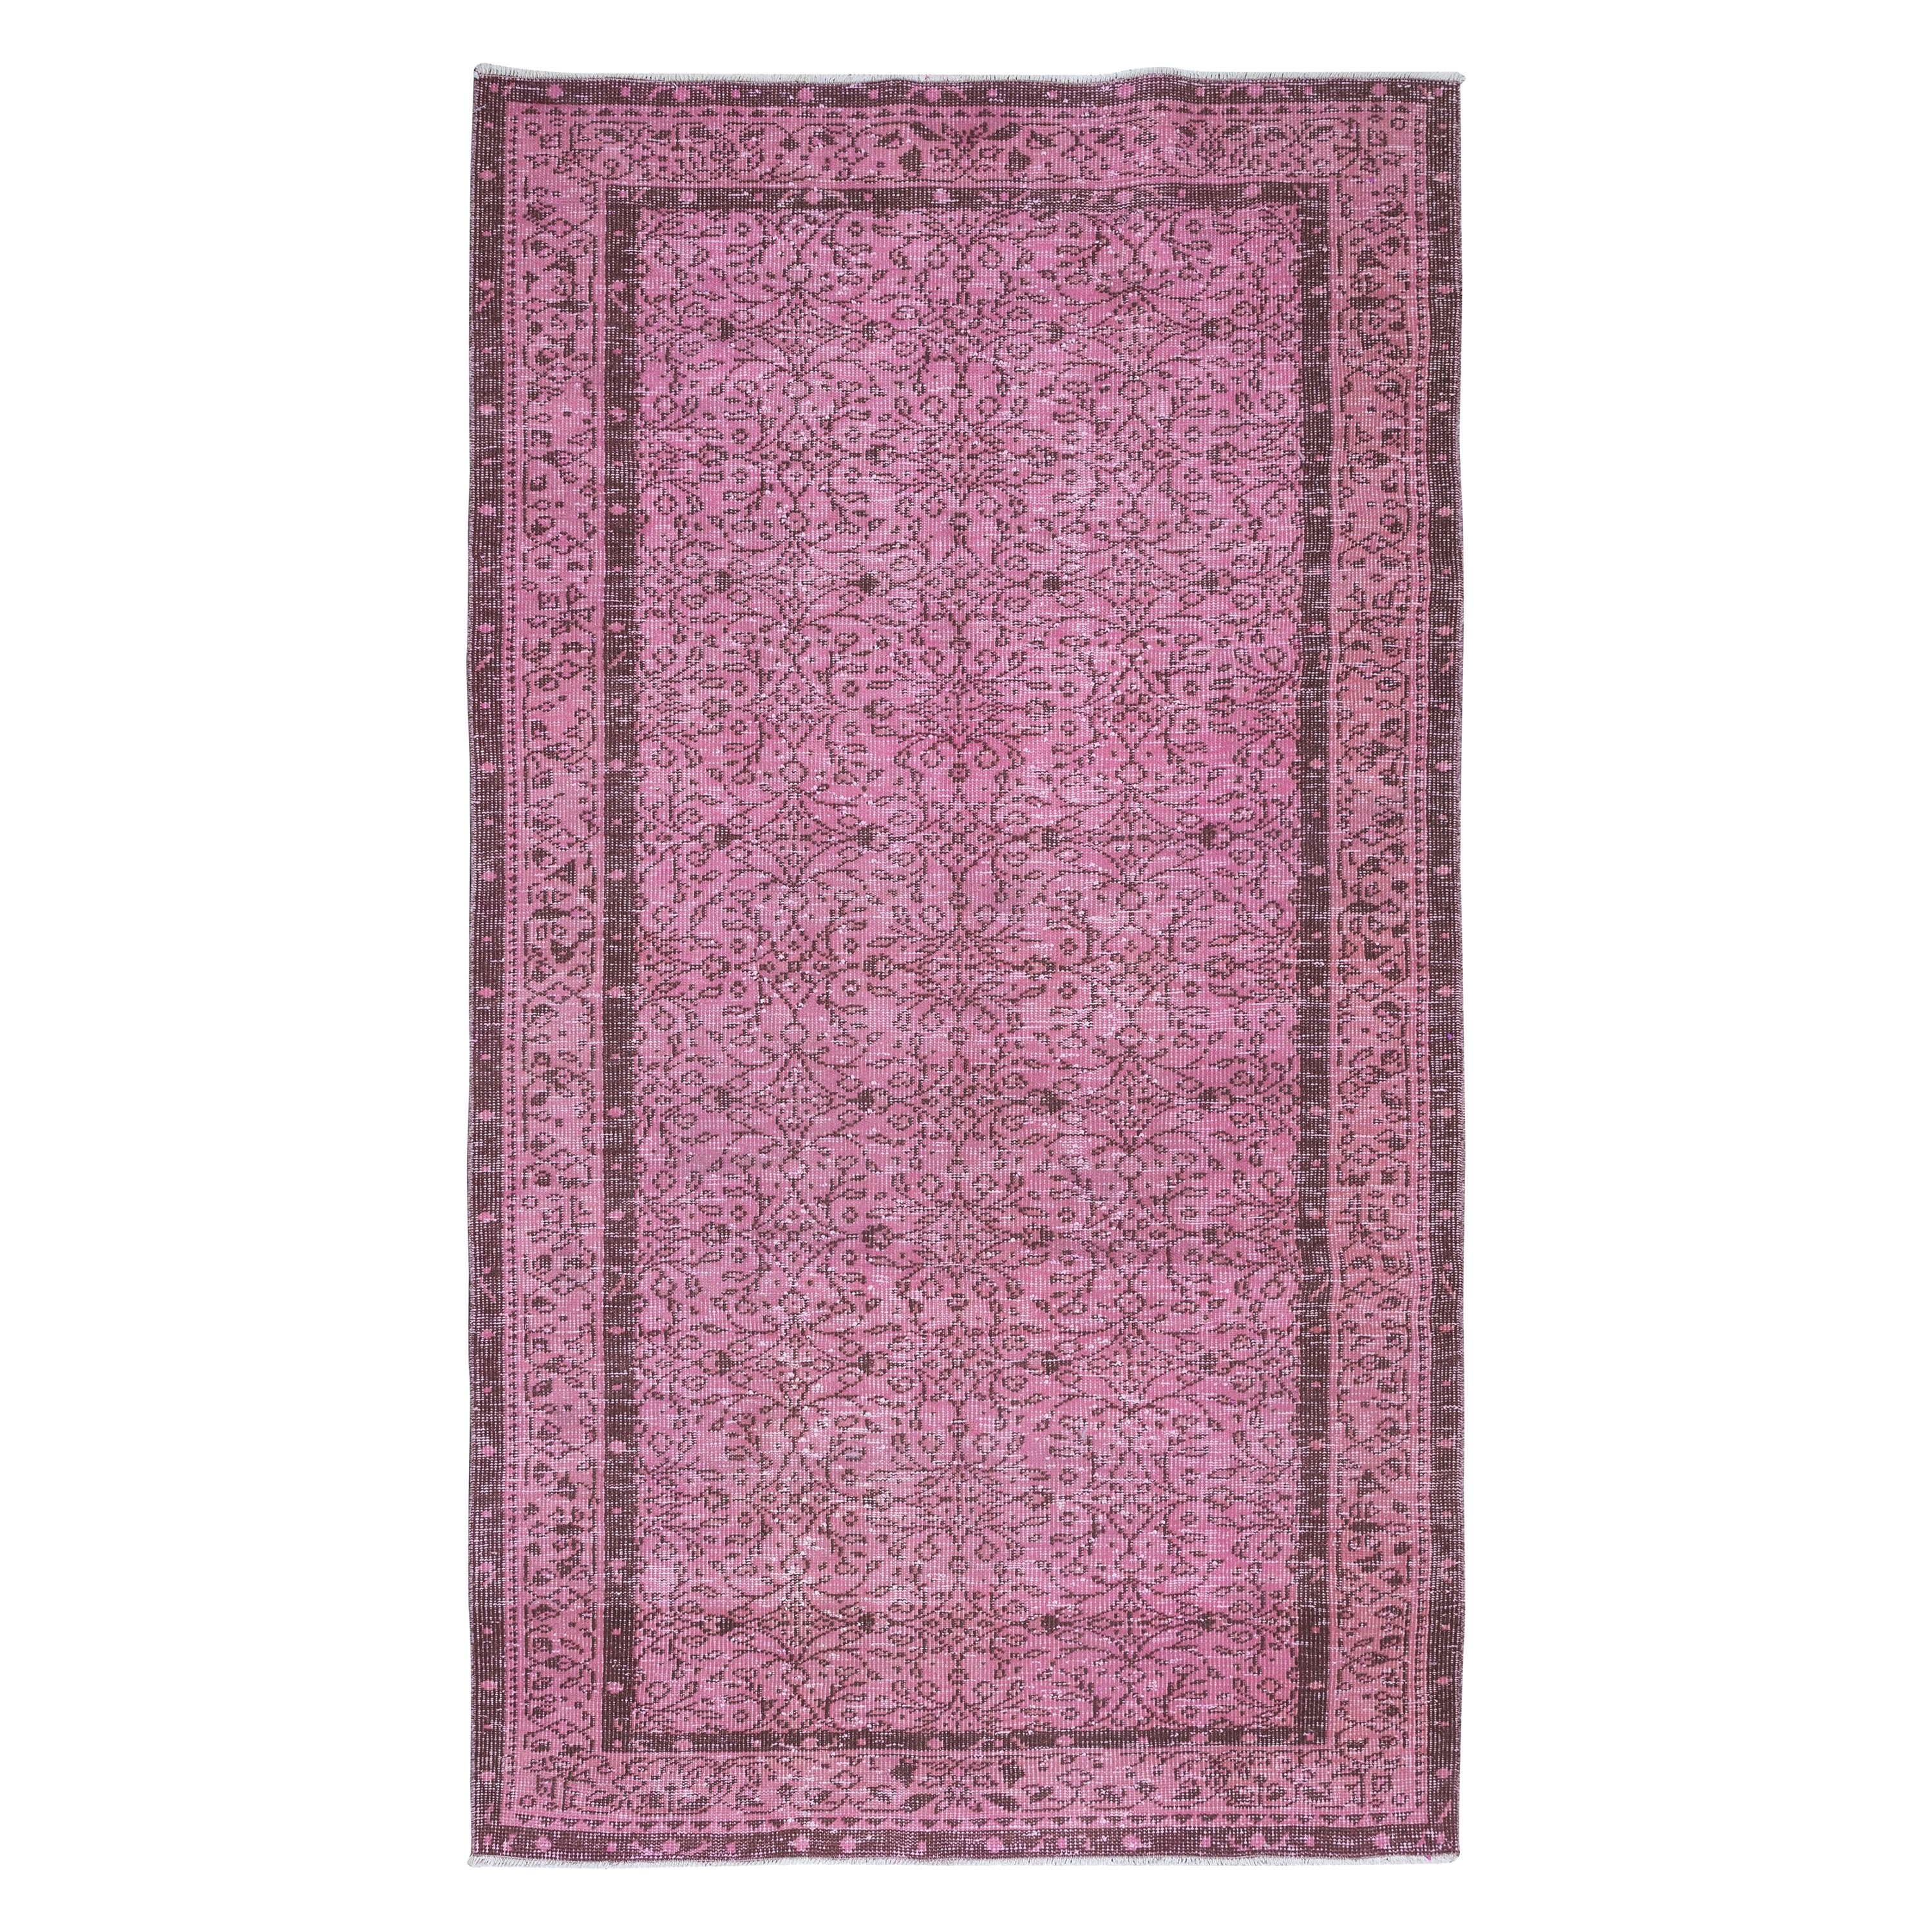 5.2x9 Ft Hand-Made Turkish Area Rug in Light Pink, Modern Wool and Cotton Carpet